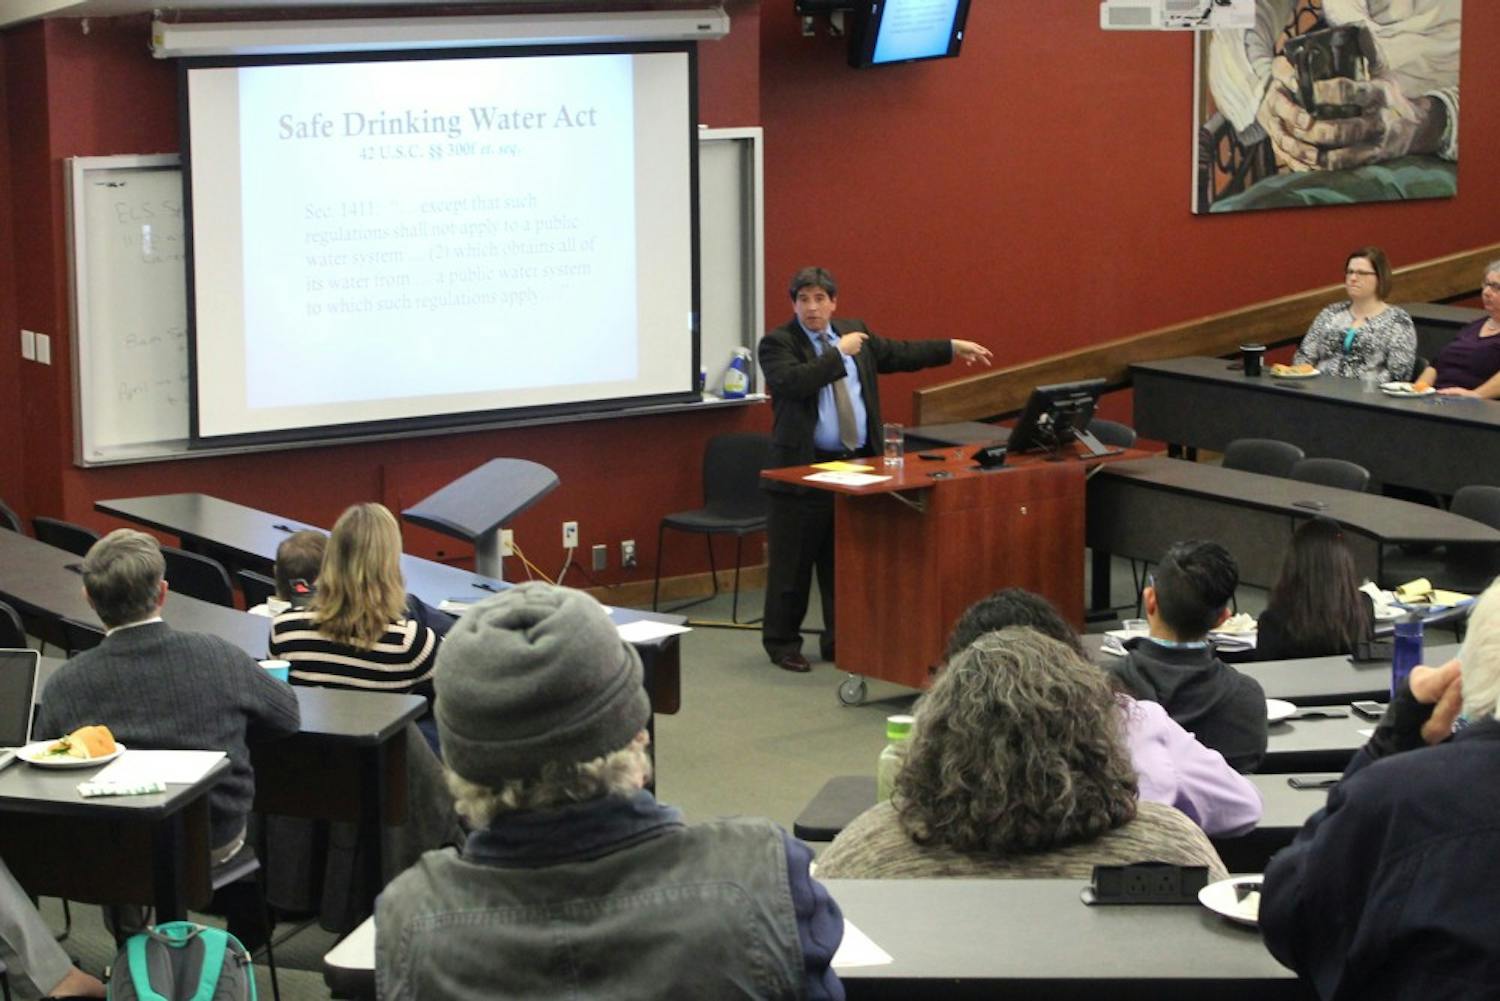 Professor Cliff Villa, who teaches in the Environmental and Natural Resources Program at the UNM Law School, presents a talk on Flint’s contaminated water crisis.